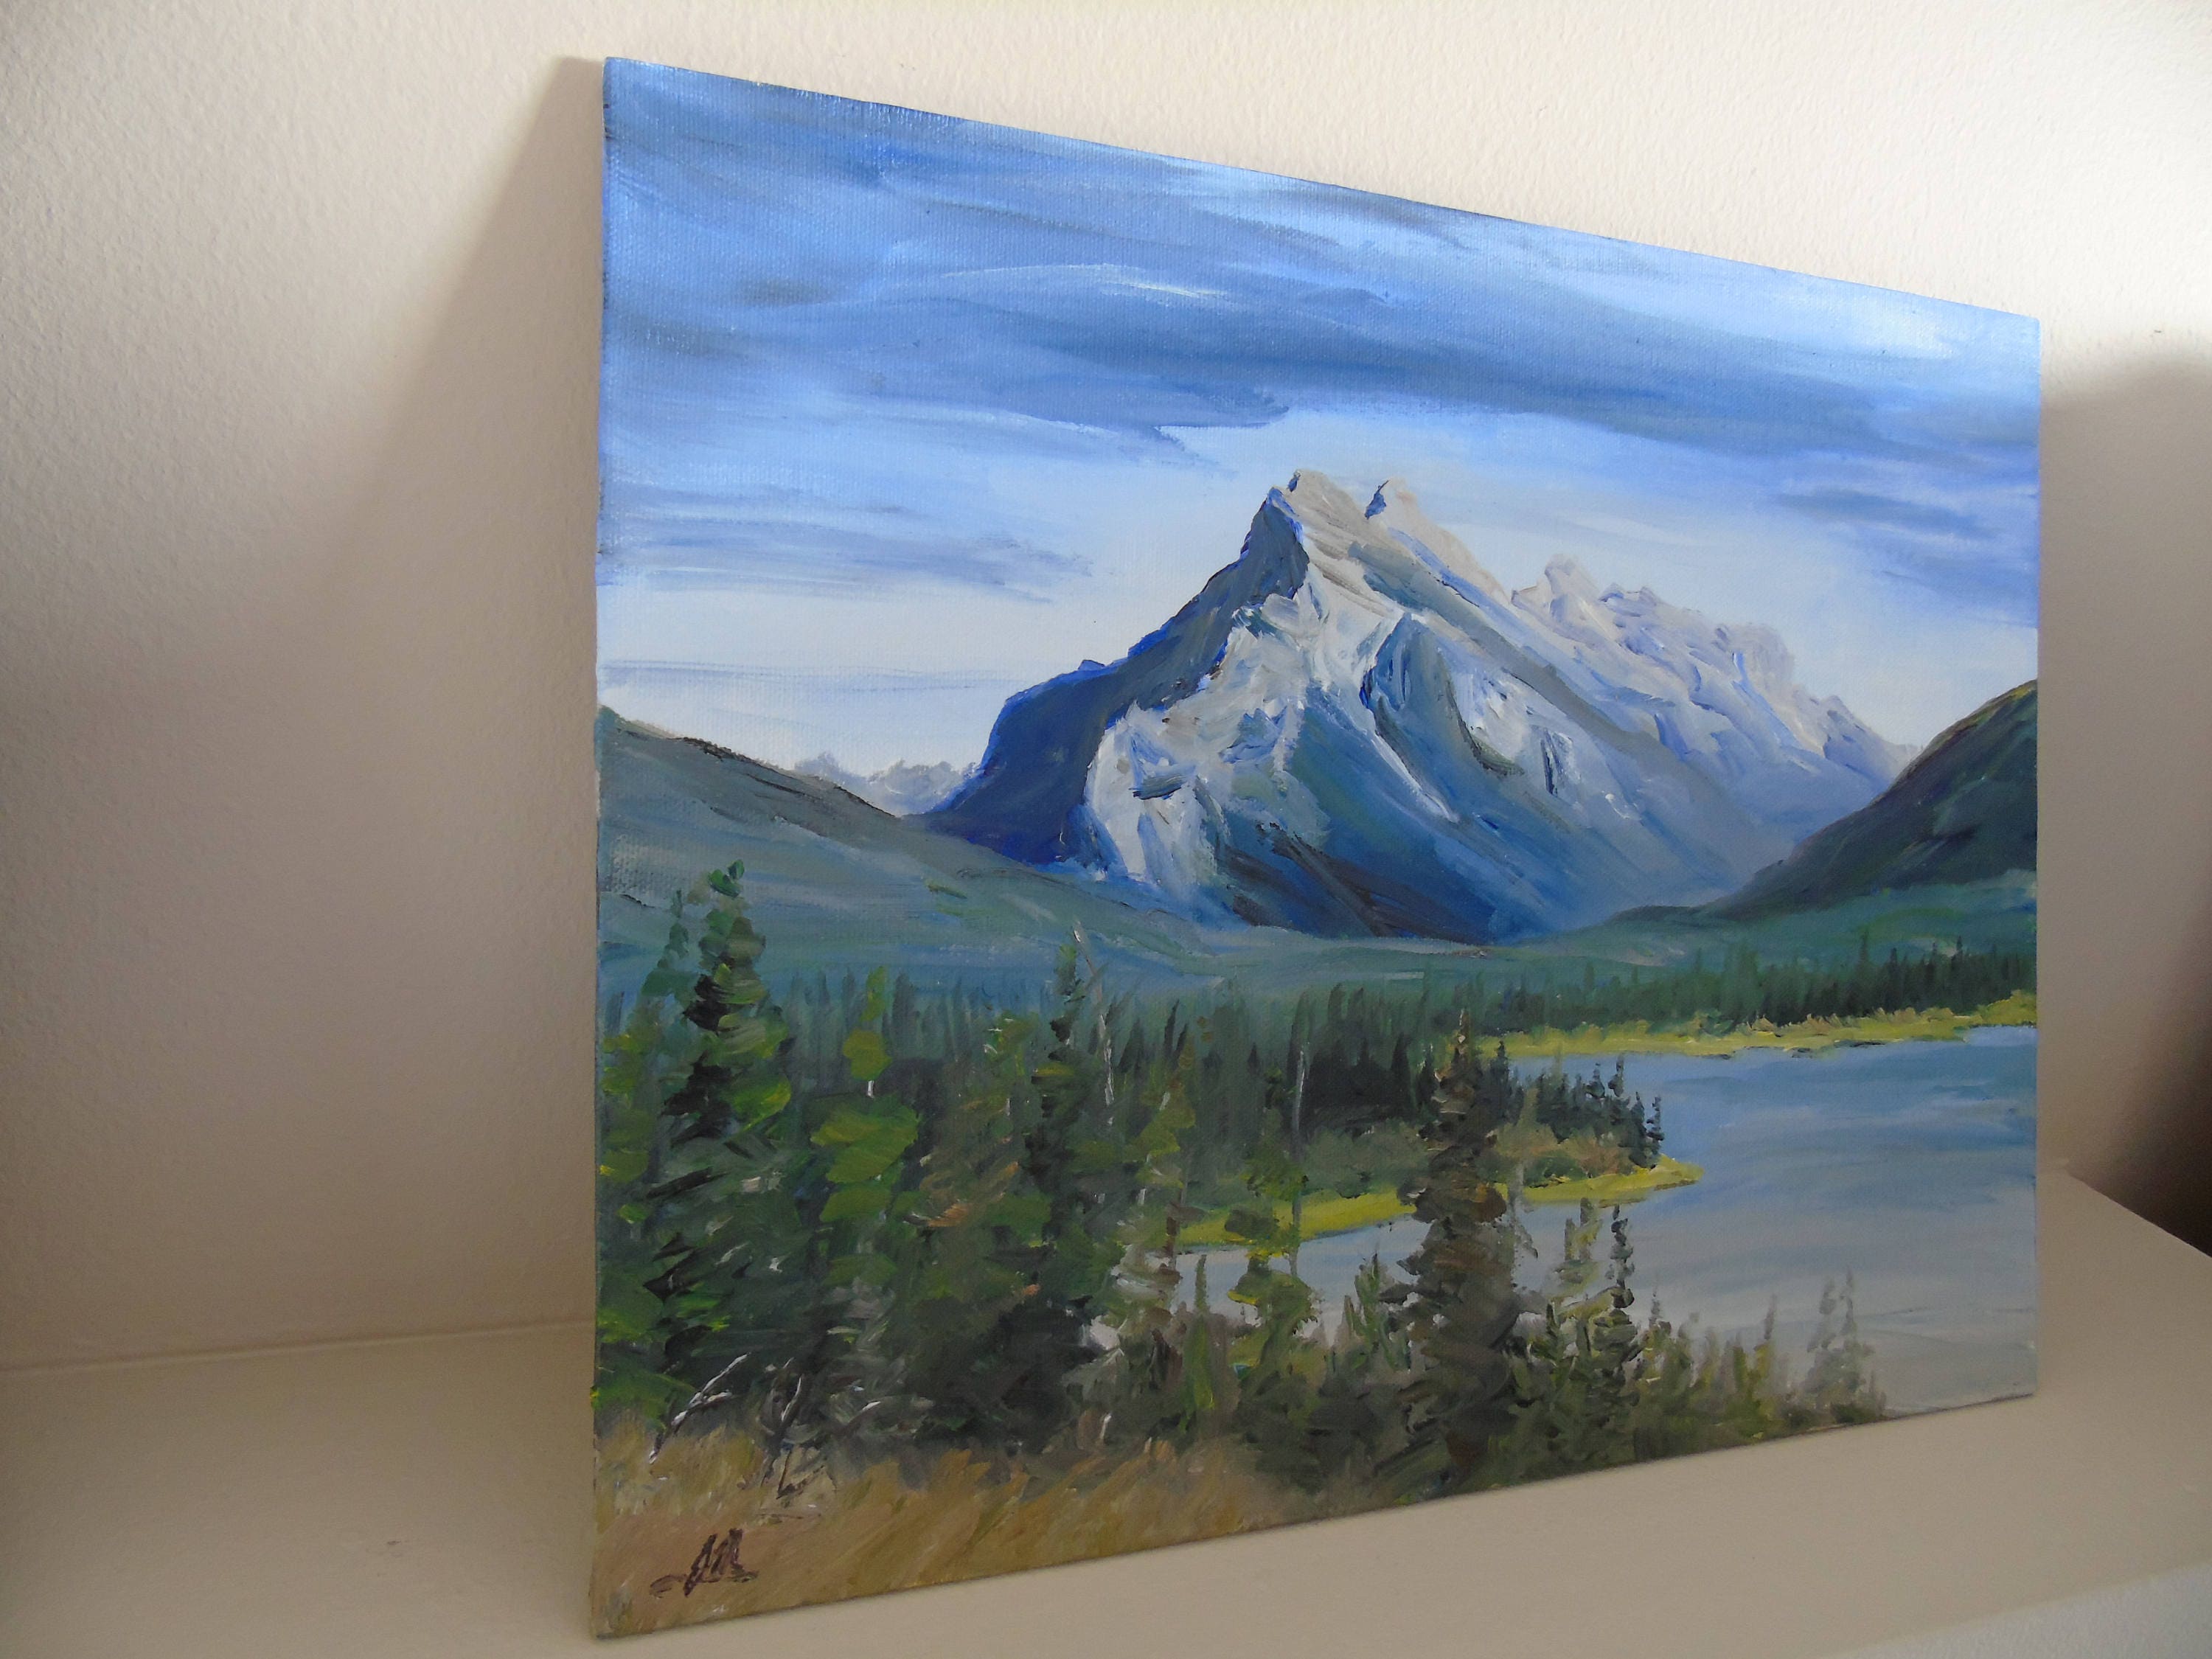 MOUNTAIN 148 Original Oil Painting on the Stretched Canvas, 11x14 